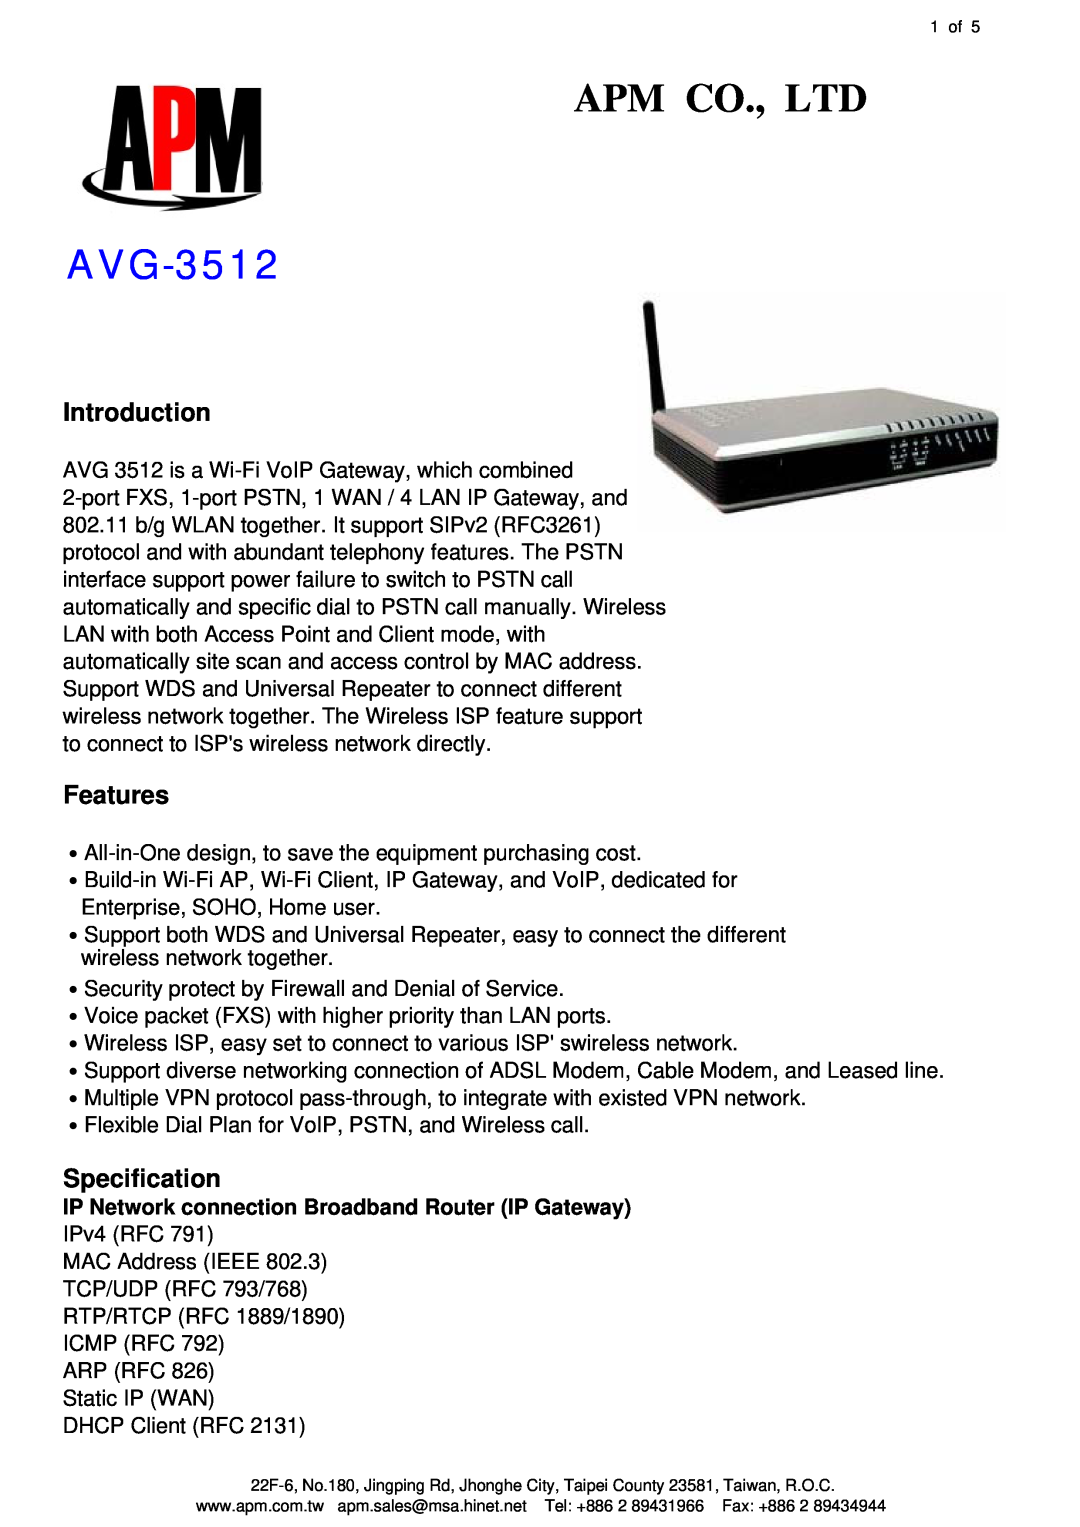 APM AVG-3512 manual Introduction, Features, Specification, IP Network connection Broadband Router IP Gateway 